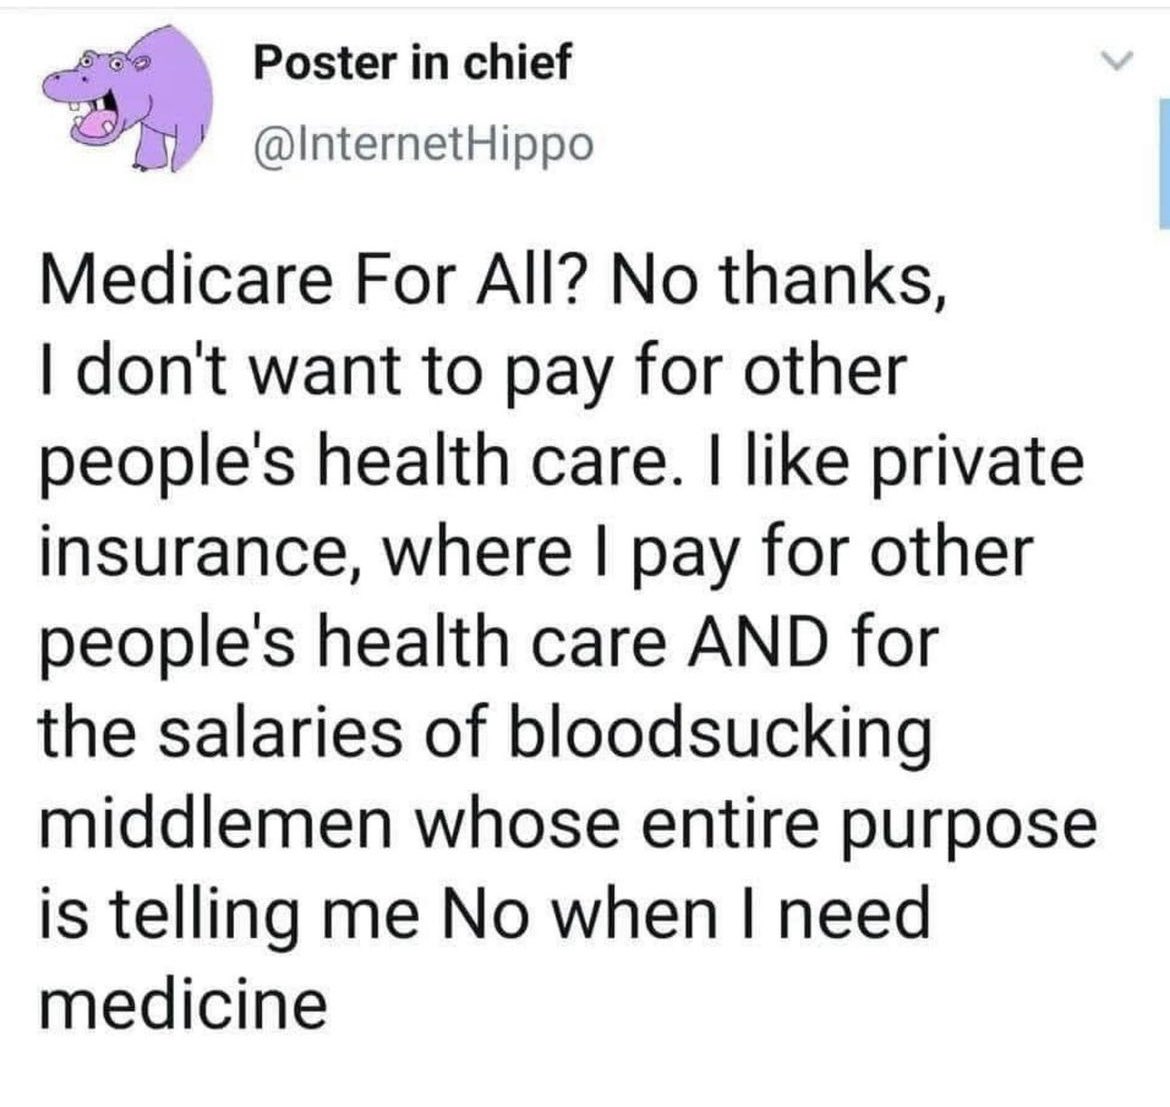 So relieved I live in Canada. Sadly, Alberta, Saskatchewan and Ontario, under the Conservatives, want to destroy our Universal Healthcare. They like having their pockets lined from Insurance companies.